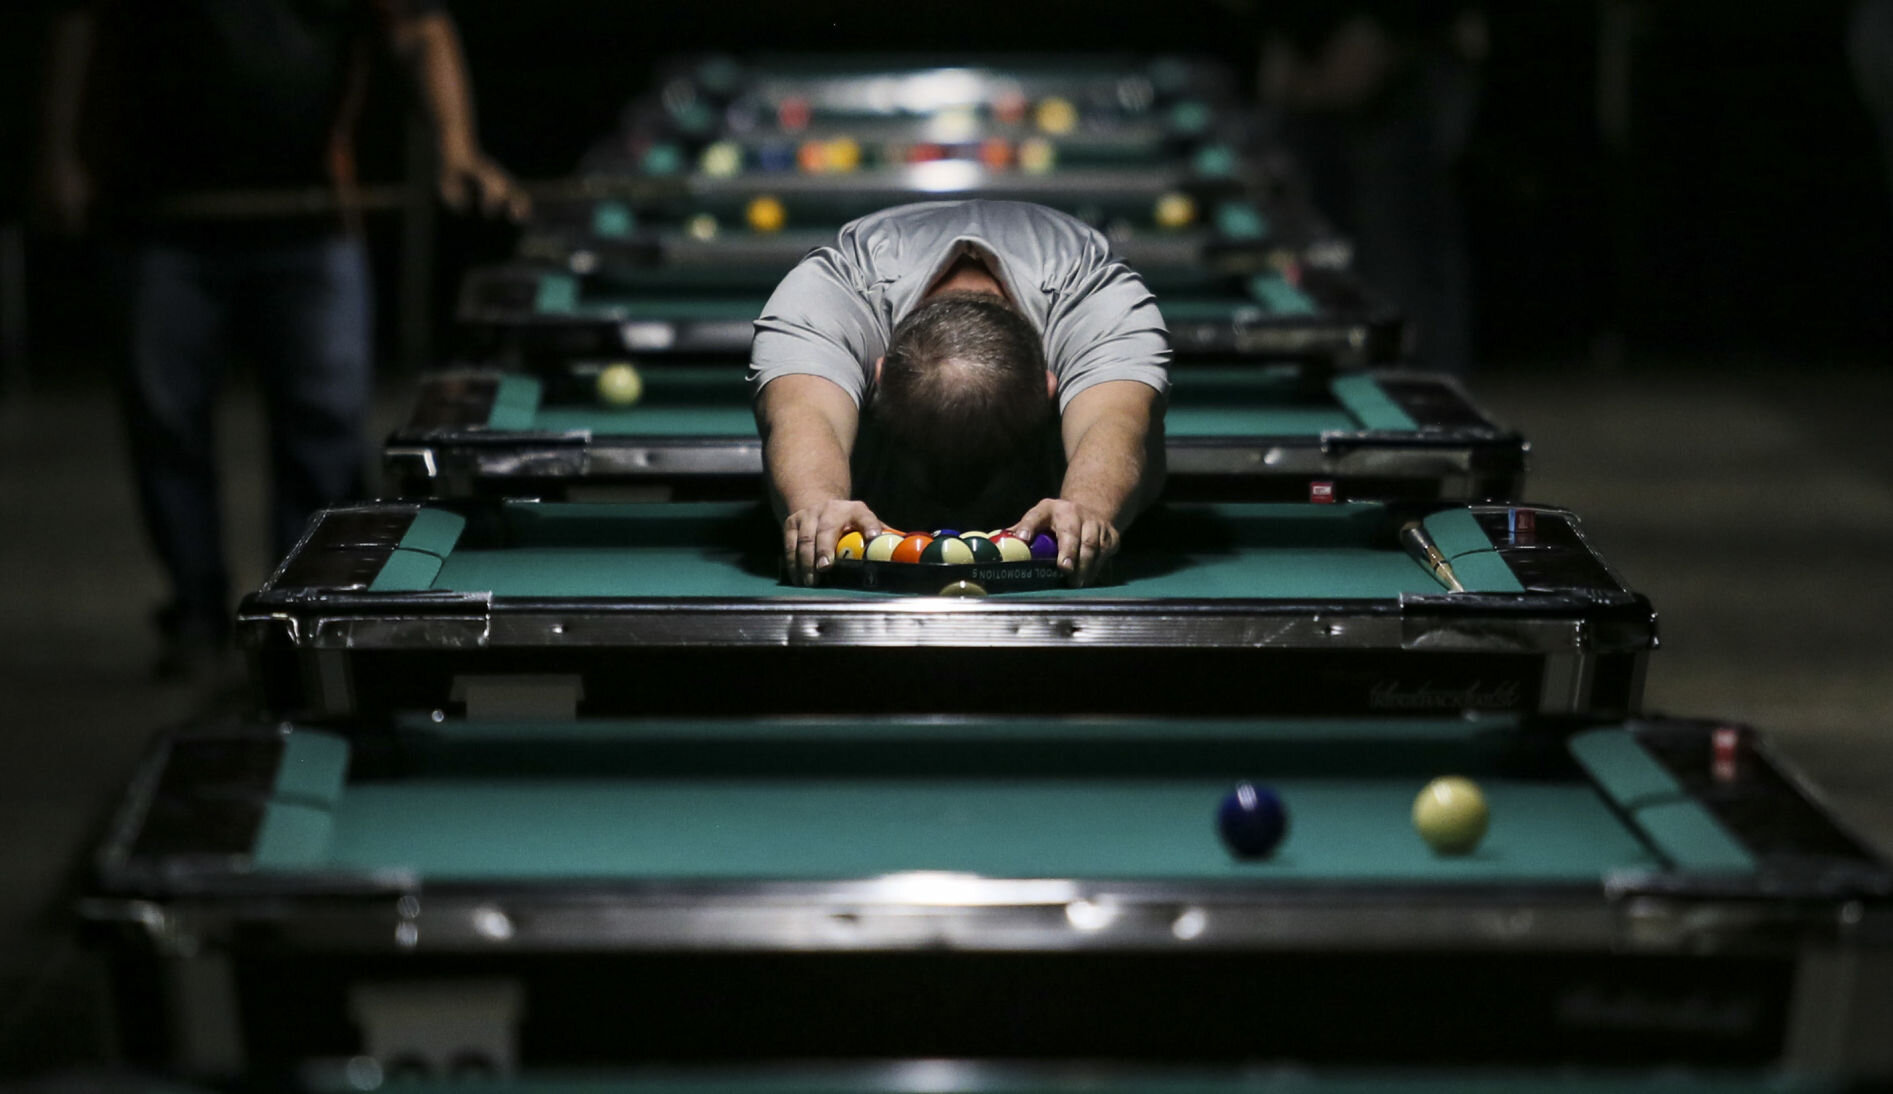  Rob Knudsen of Princeton stretches his shoulders while racking the balls during 2019 Iowa ACS Iowa State Pool Championships at the RiverCenter in Davenport. 